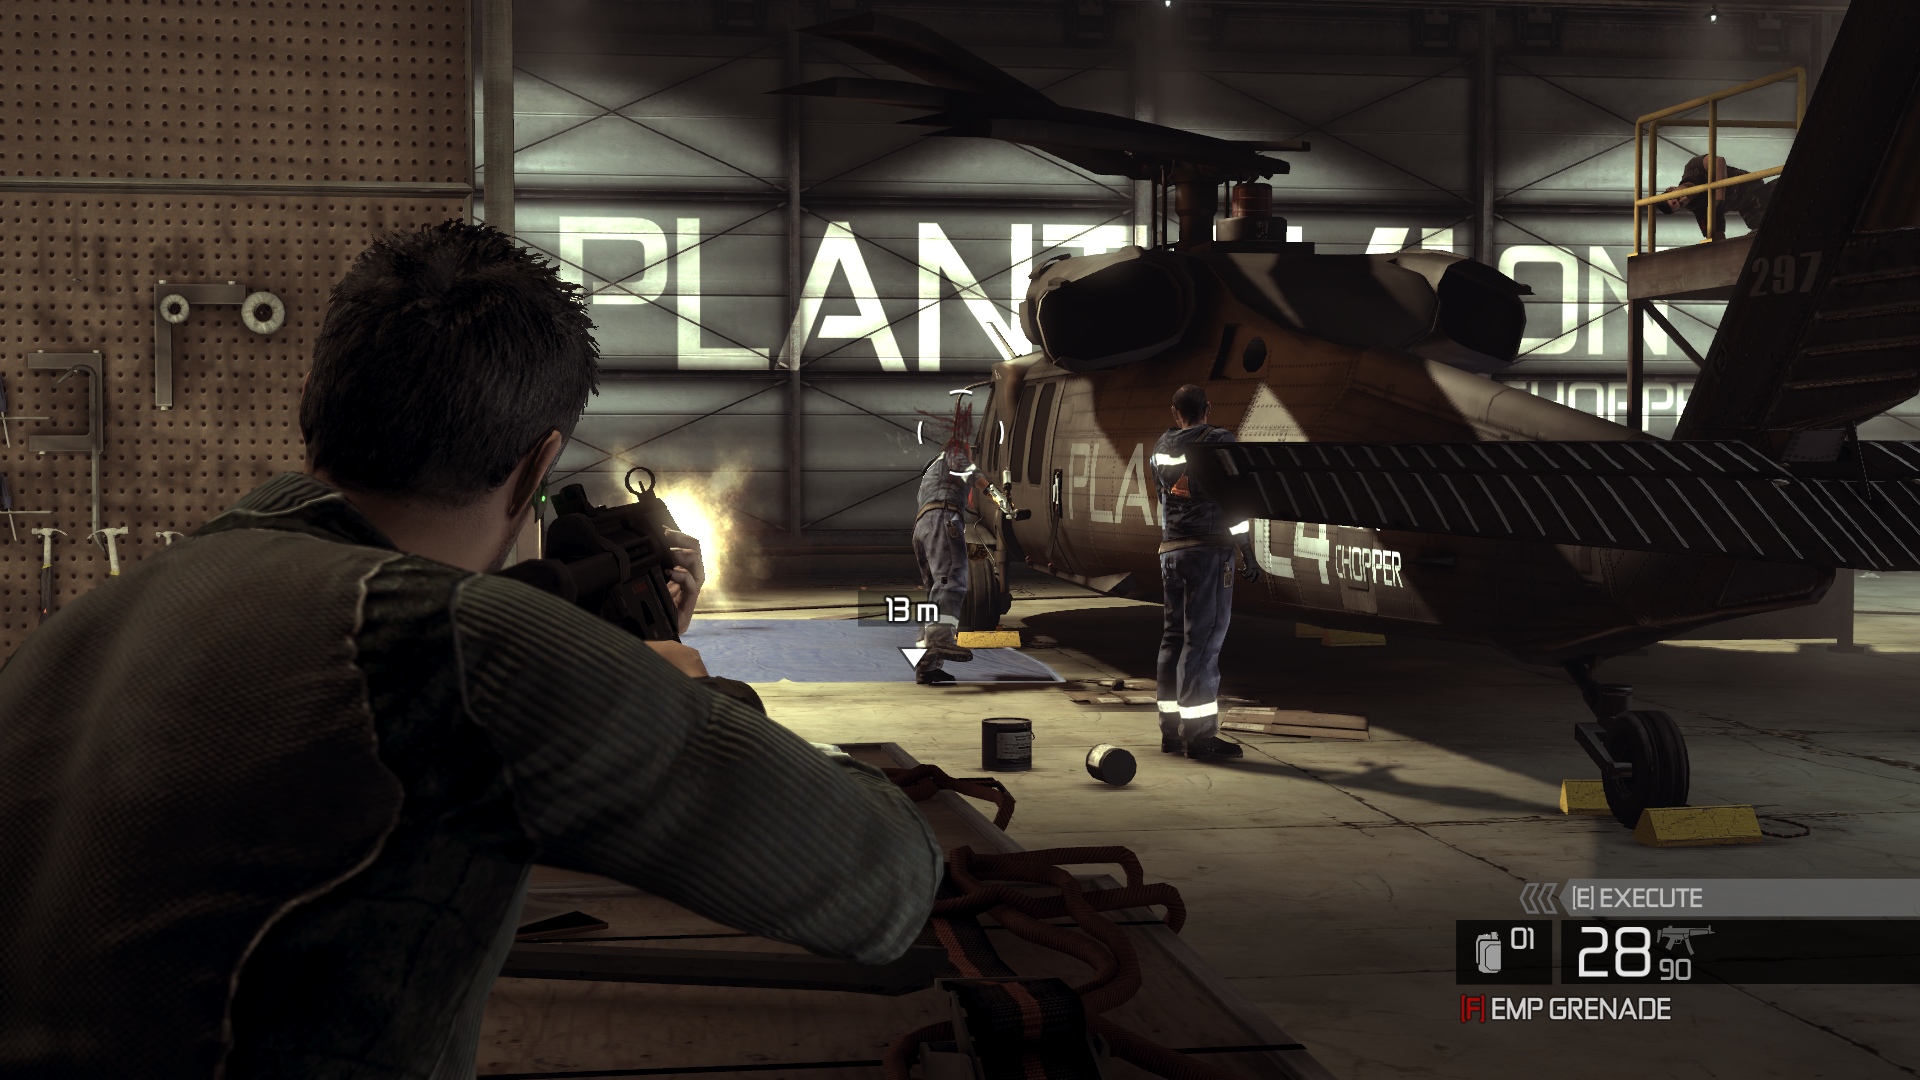 Nice Images Collection: Tom Clancy's Splinter Cell: Conviction Desktop Wallpapers